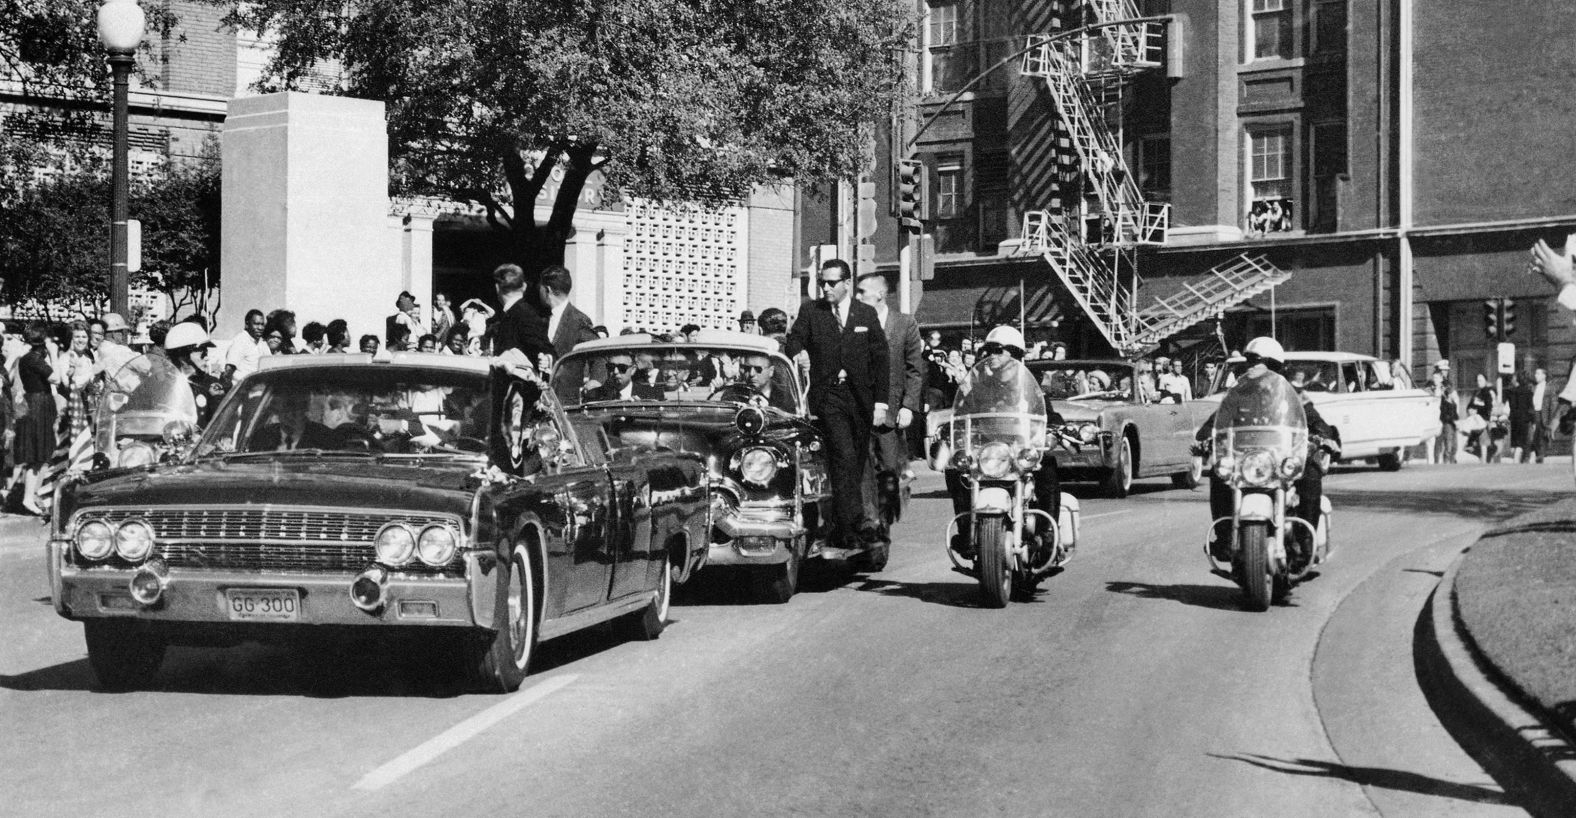 The motorcade proceeds along Elm Street past the Texas School Book Depository, shortly after Kennedy was shot. Looking through the limo's windshield in the foreground, Kennedy appears to raise his hand toward his head after being shot. The first lady holds his forearm in an effort to aid him.